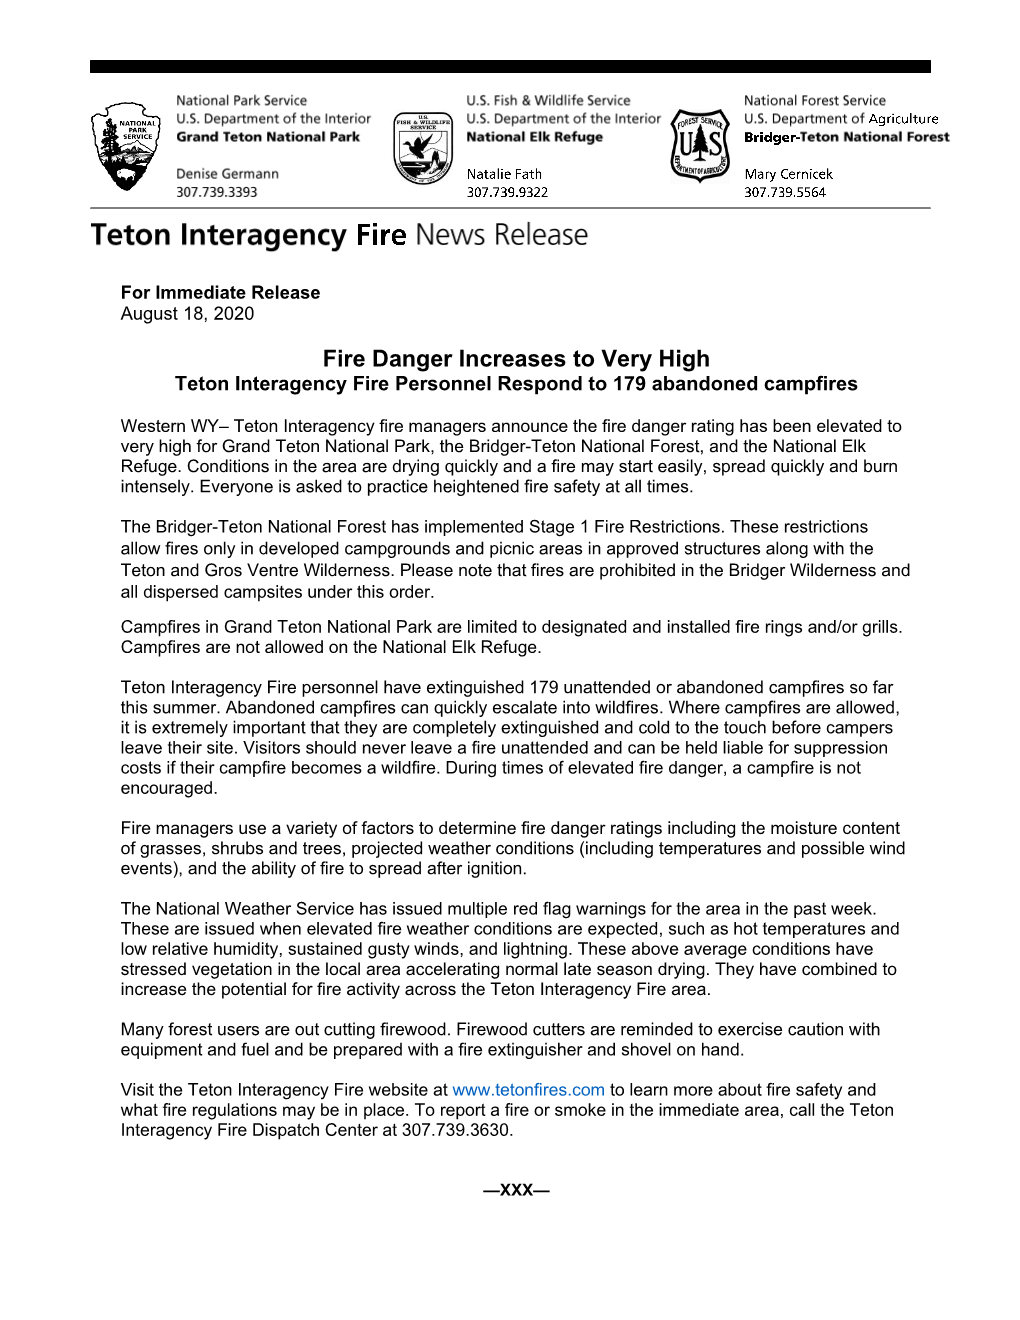 Fire Danger Increases to Very High Teton Interagency Fire Personnel Respond to 179 Abandoned Campfires